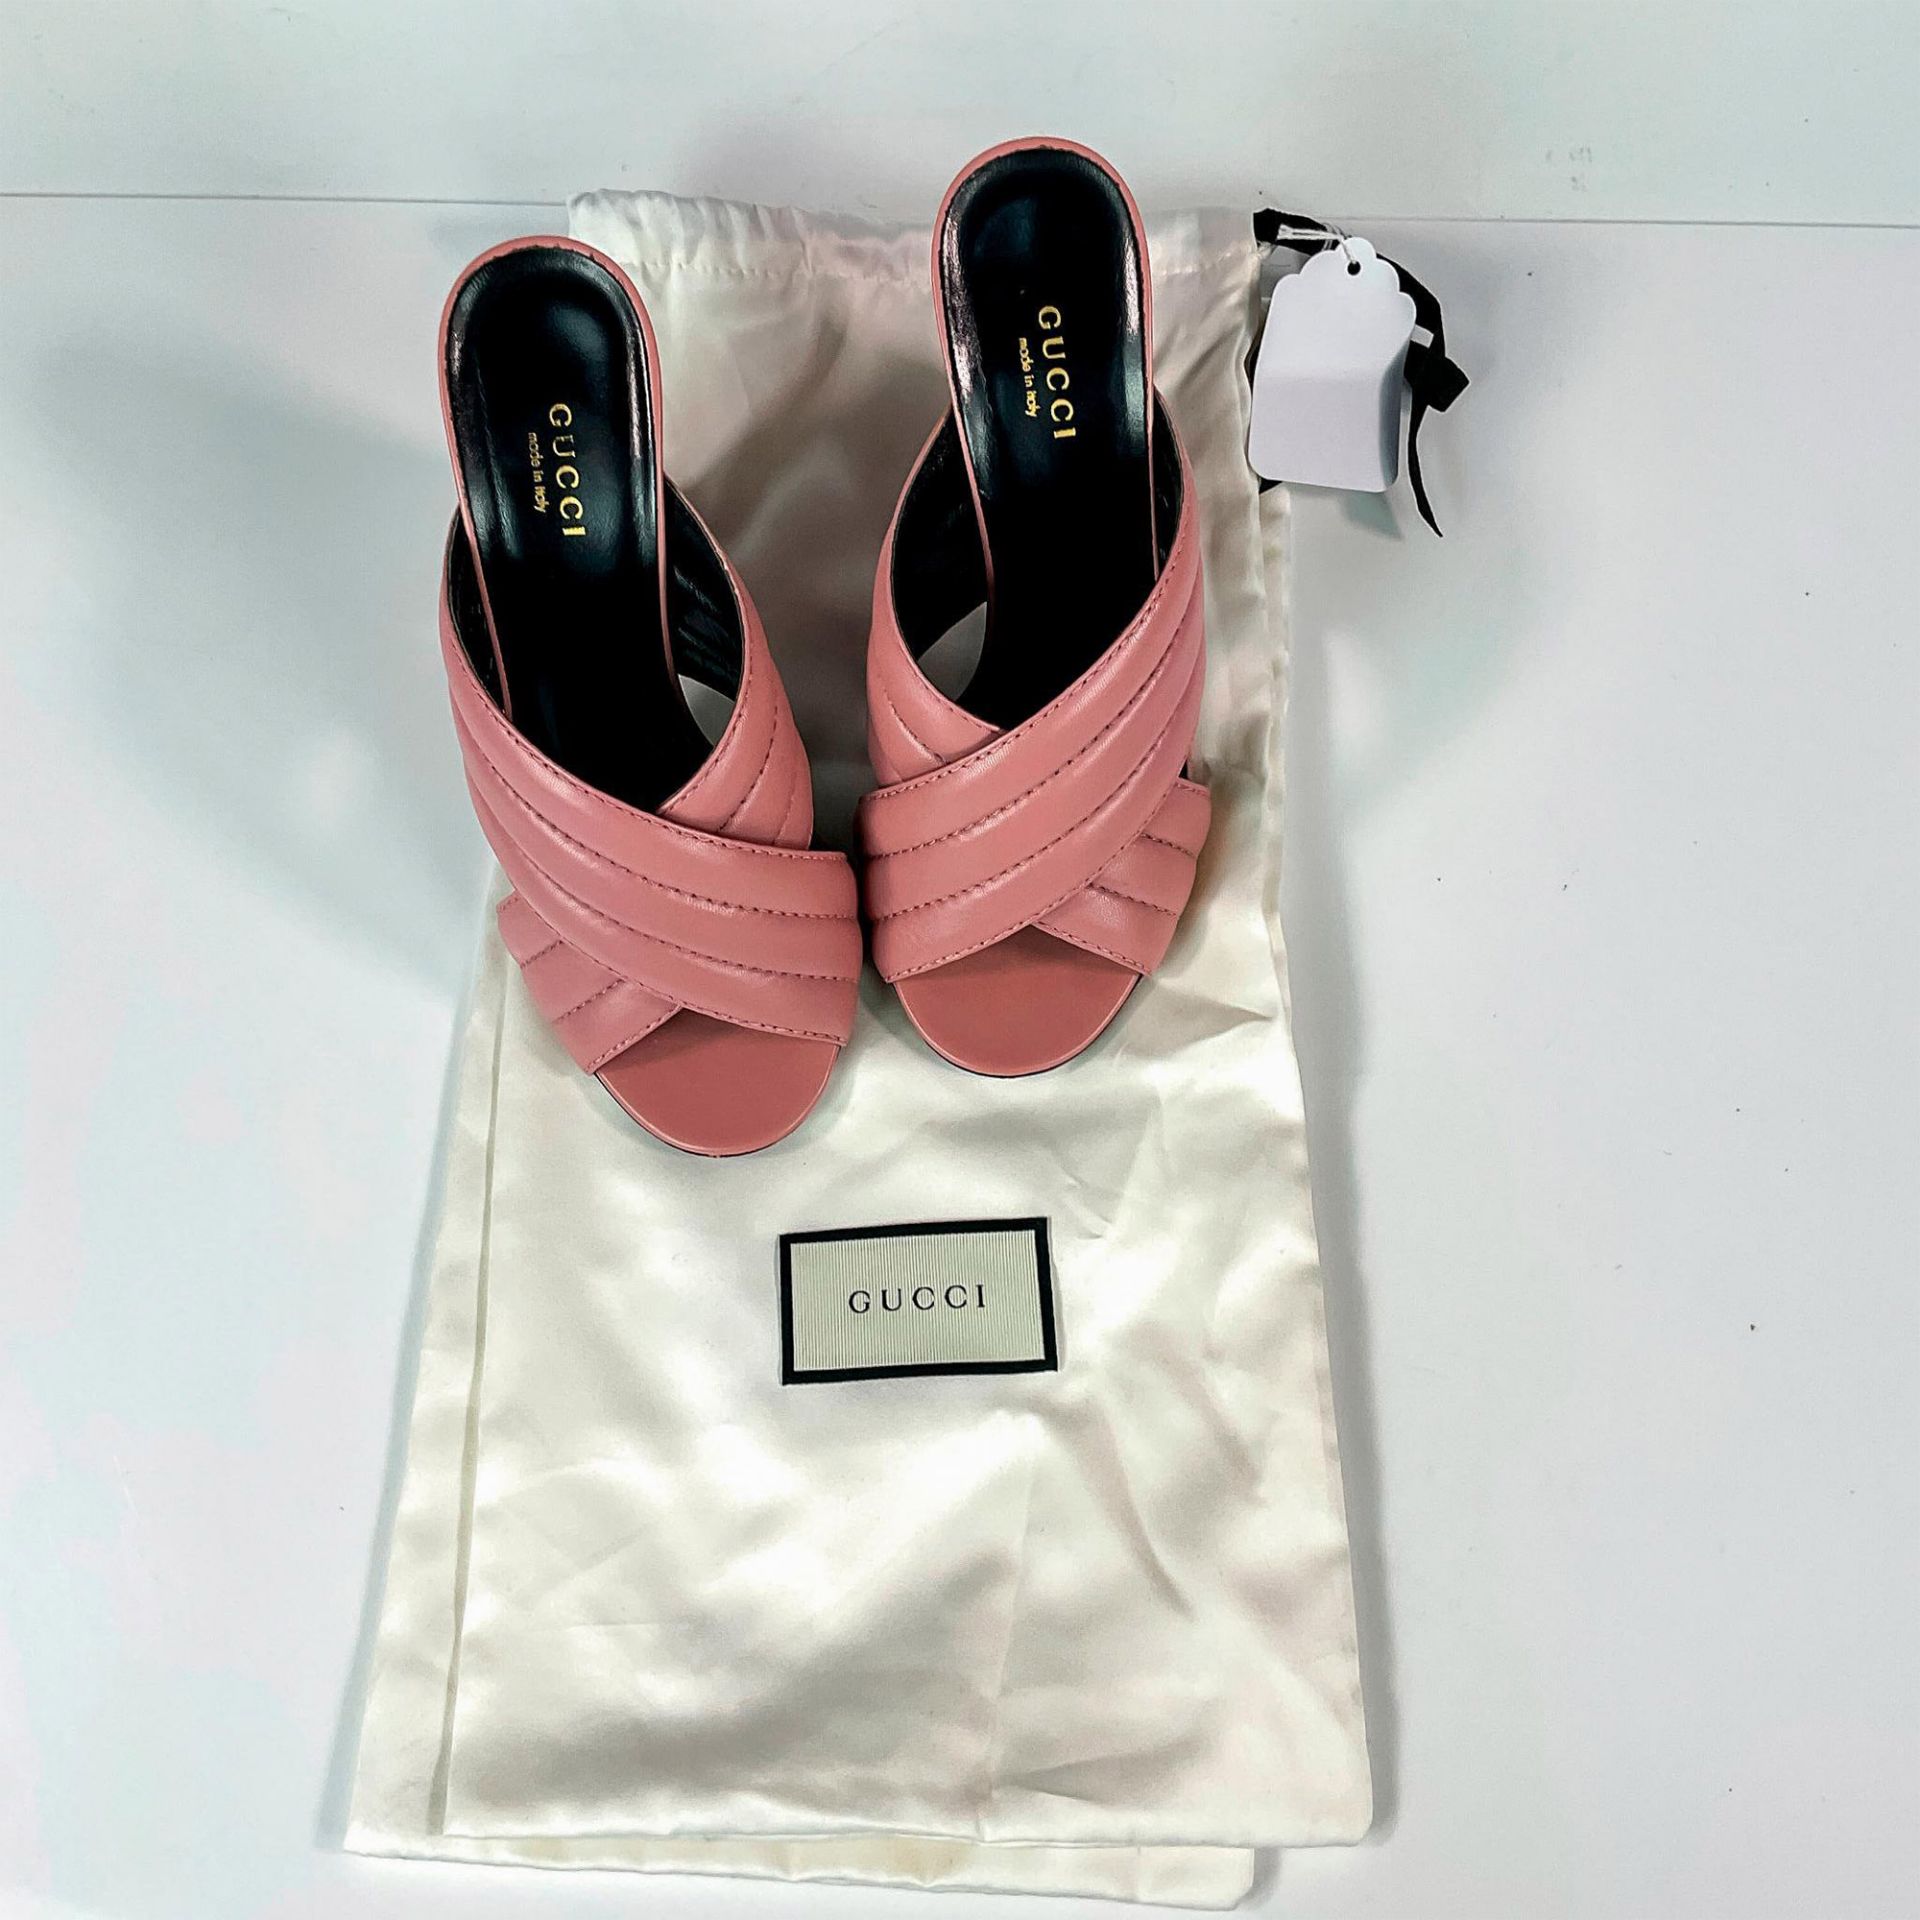 Gucci Pink Quilted Leather Mules - Image 2 of 4